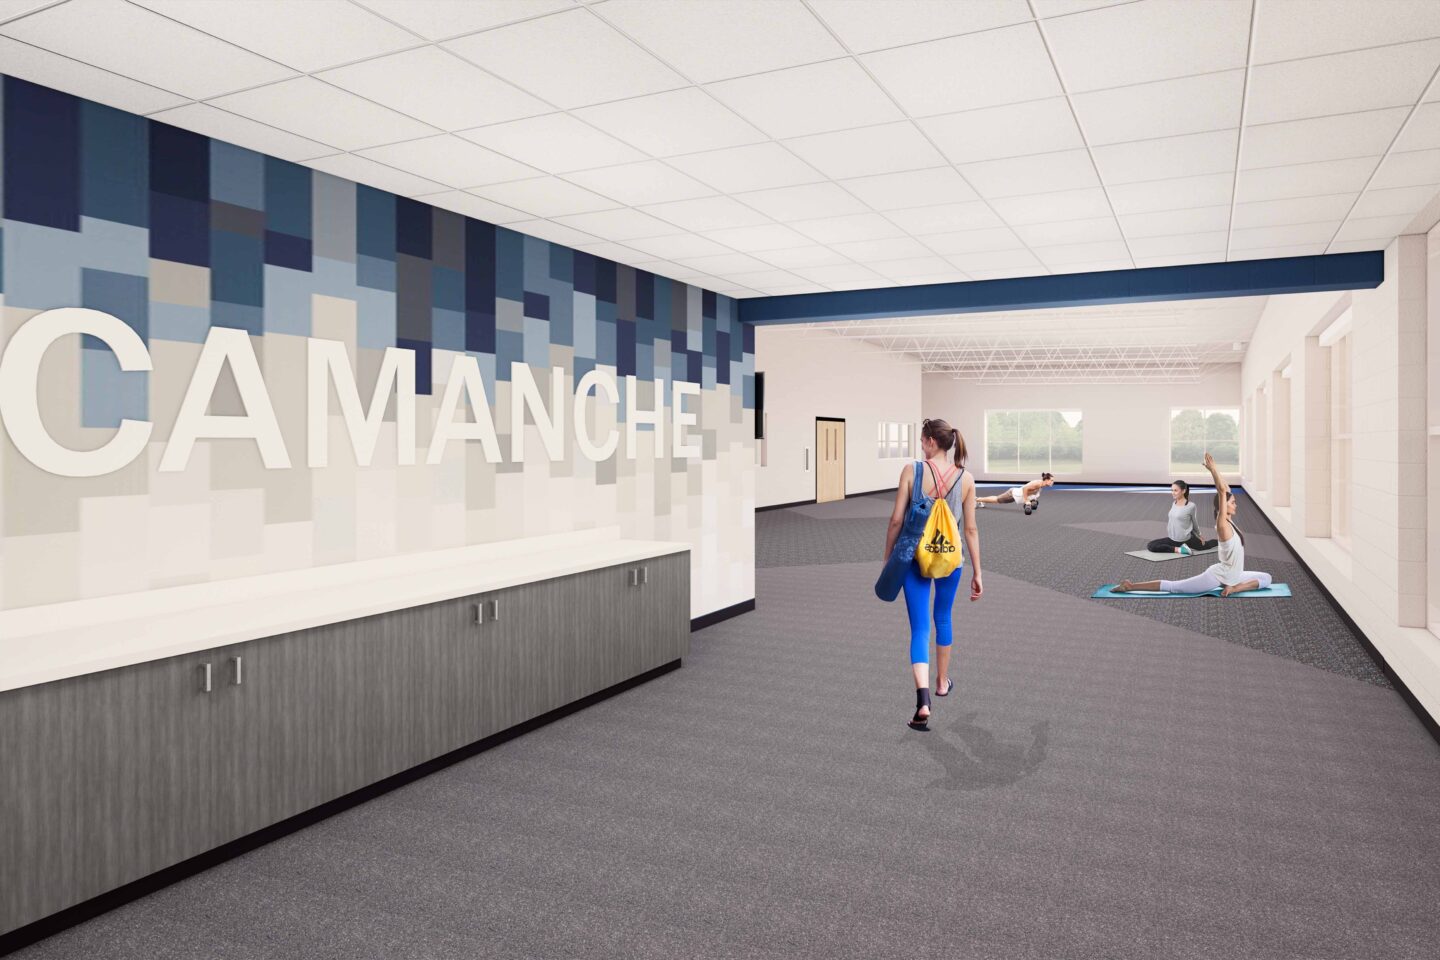 A rendering of the Camanche High School fitness center entrance